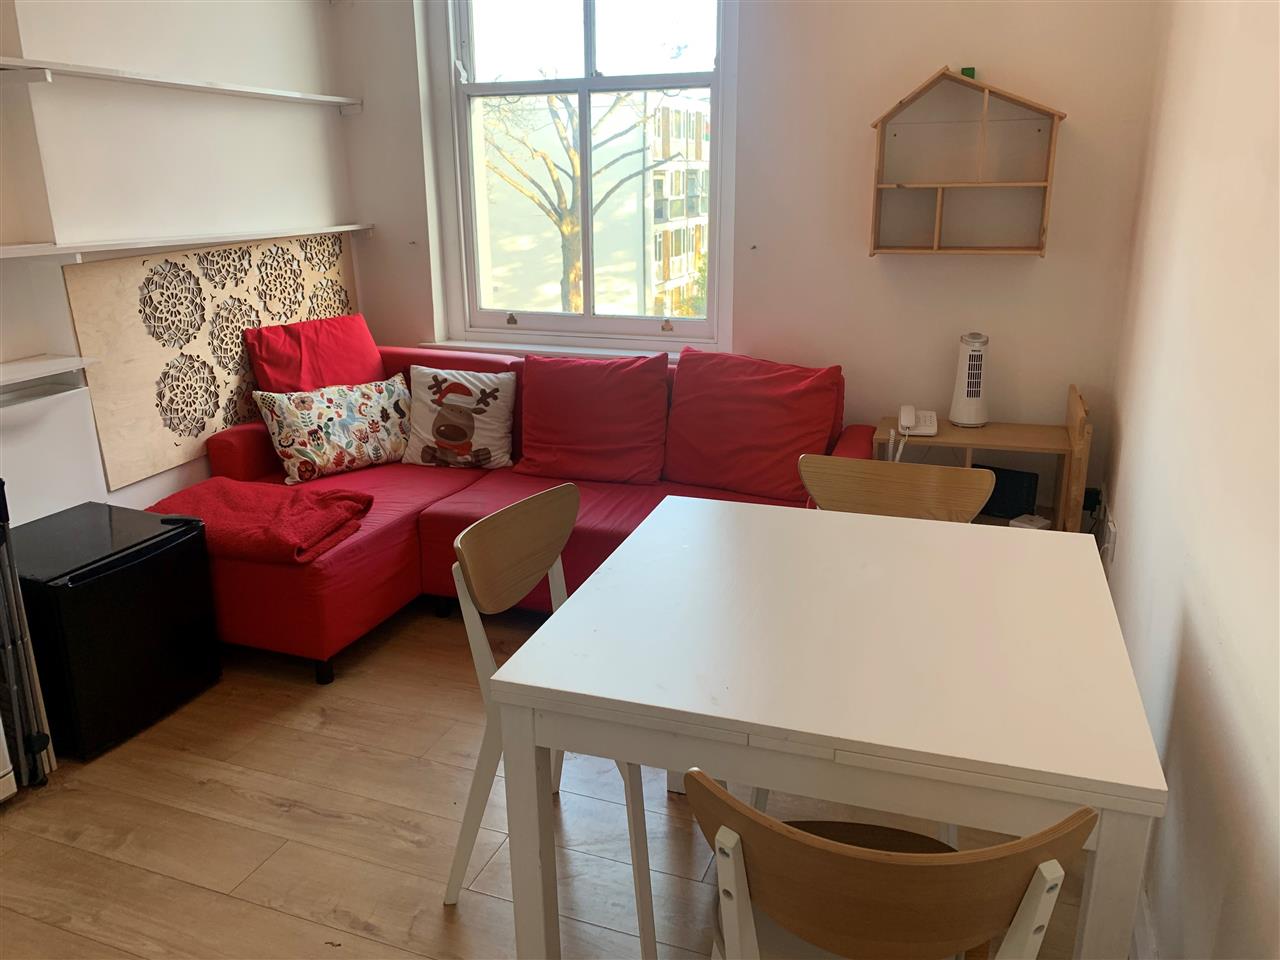 AVAILABLE FROM 23RD MARCH 2023! A conveniently located FURNISHED apartment on the first floor of an imposing period building behind secure electronic gates. The accommodation comprises of an open plan reception/equipped kitchen, two bedrooms (one double/one large single) and shower room. ...